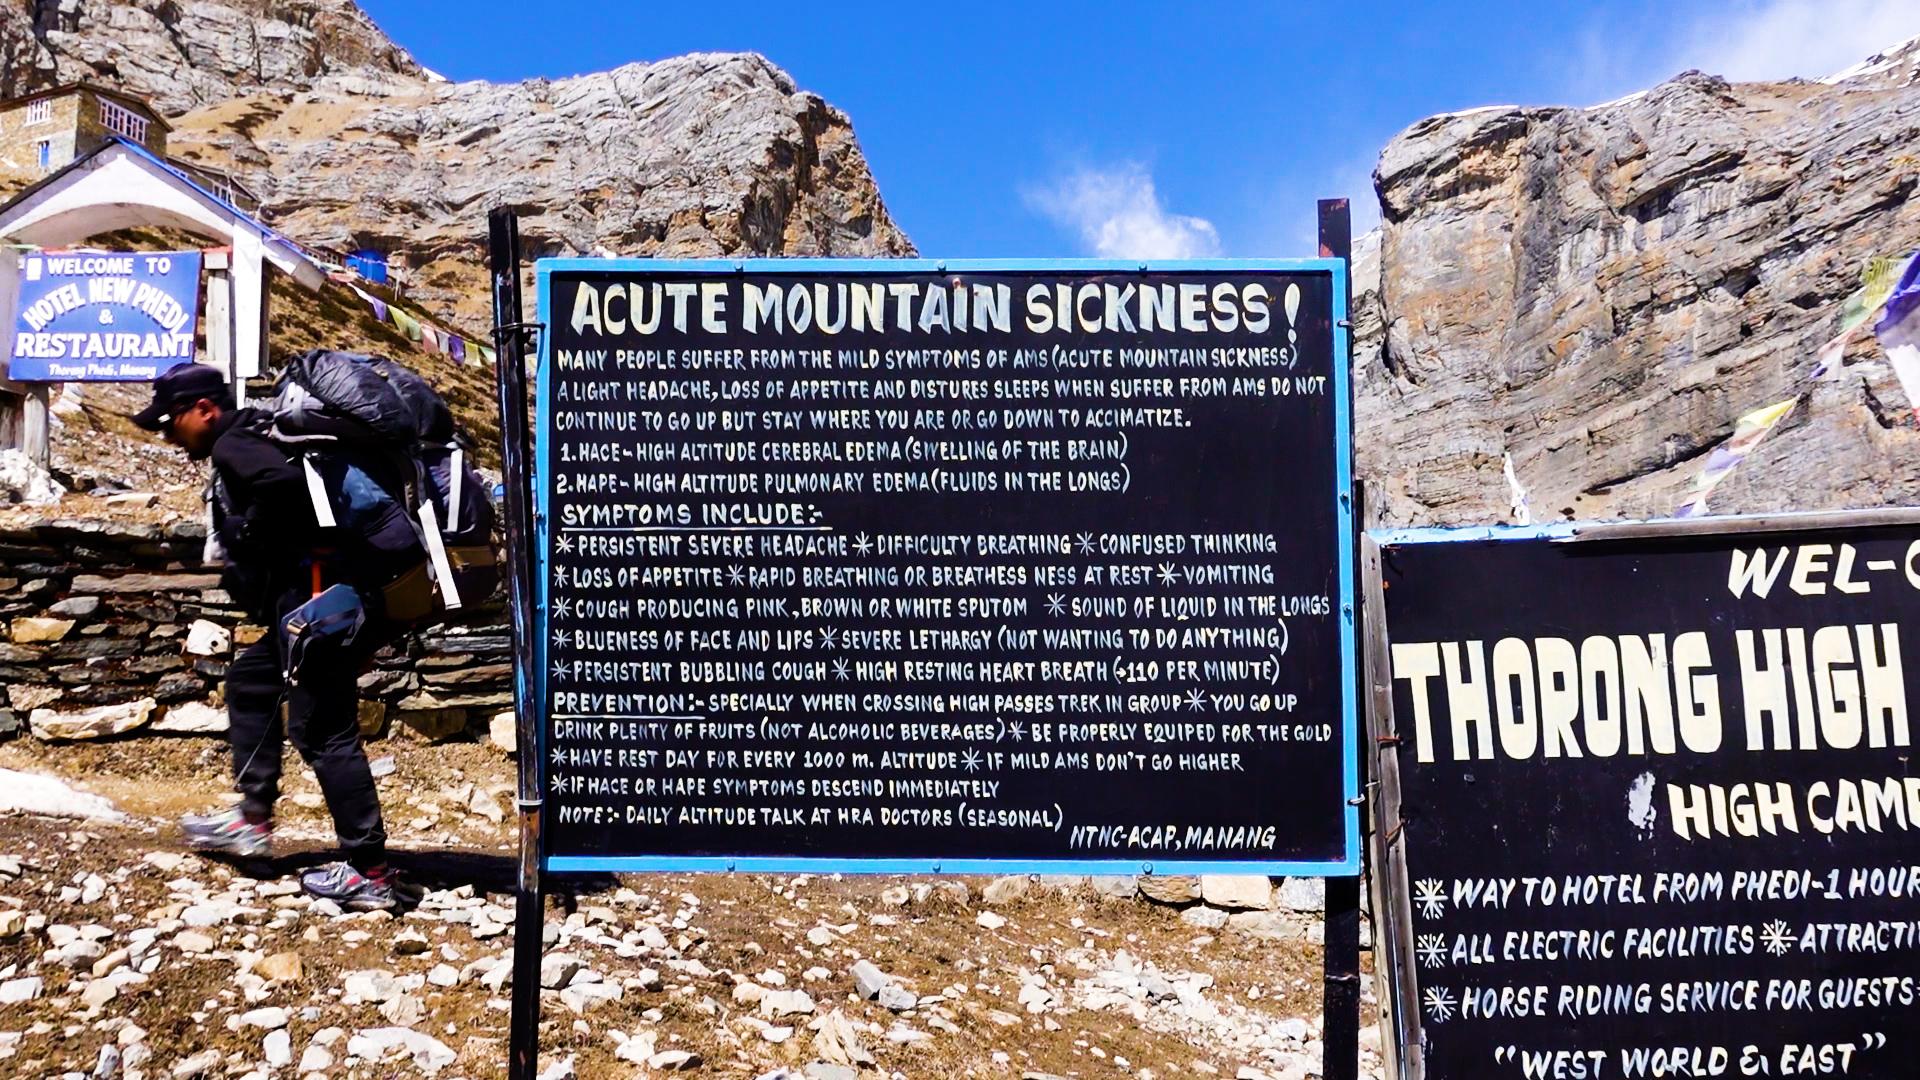 An acute mountain sickness sign at the Thorong High Camp.